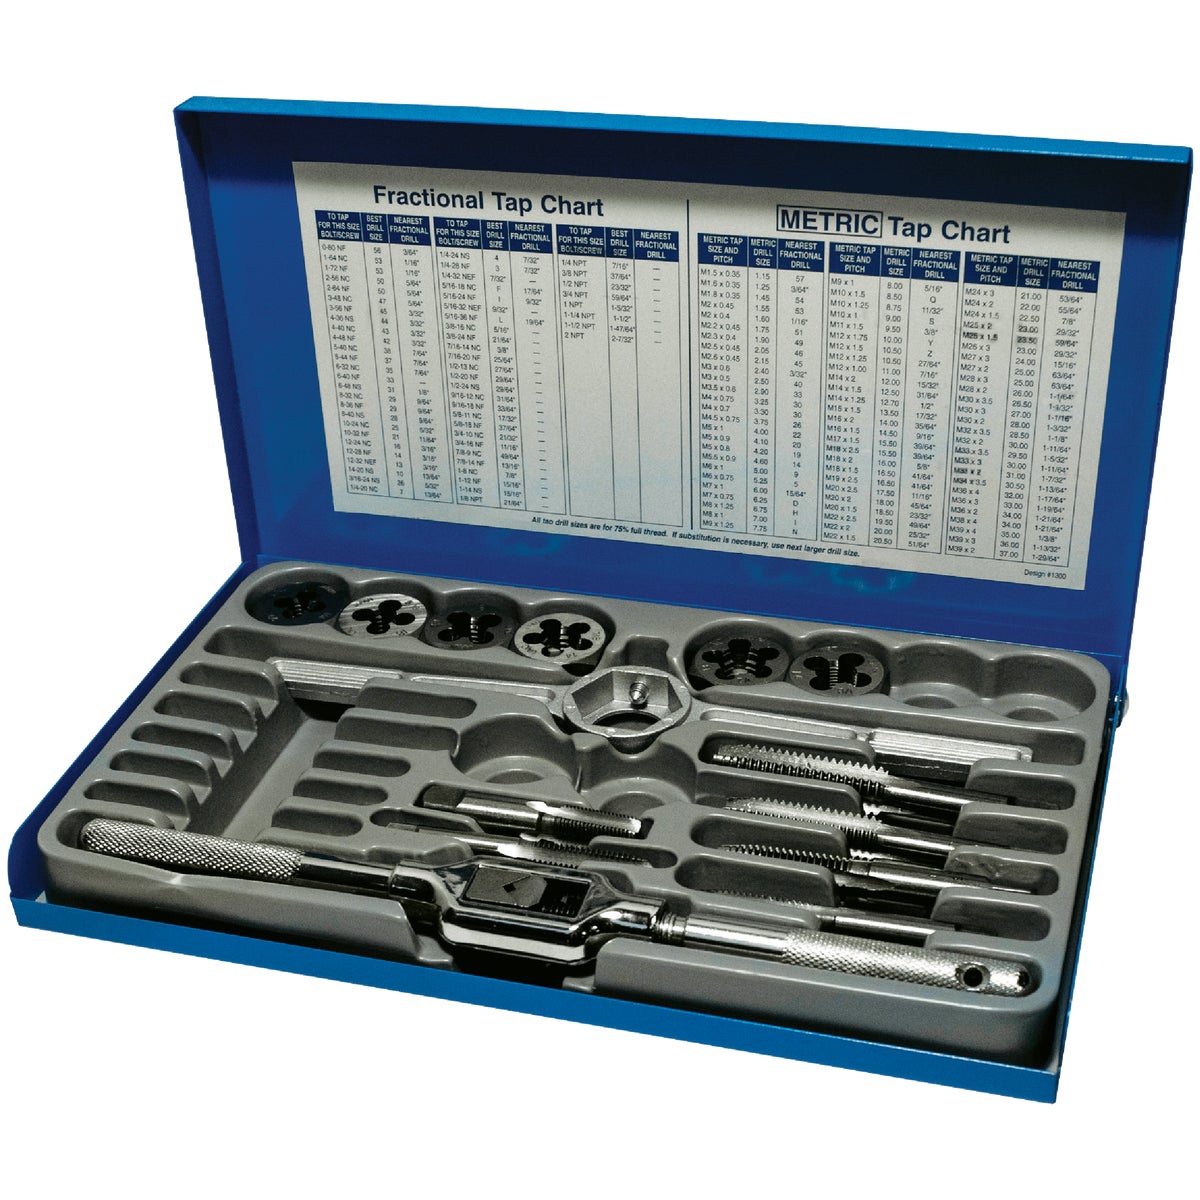 Century Drill & Tool Tap and Die Fractional Set (14-Piece)